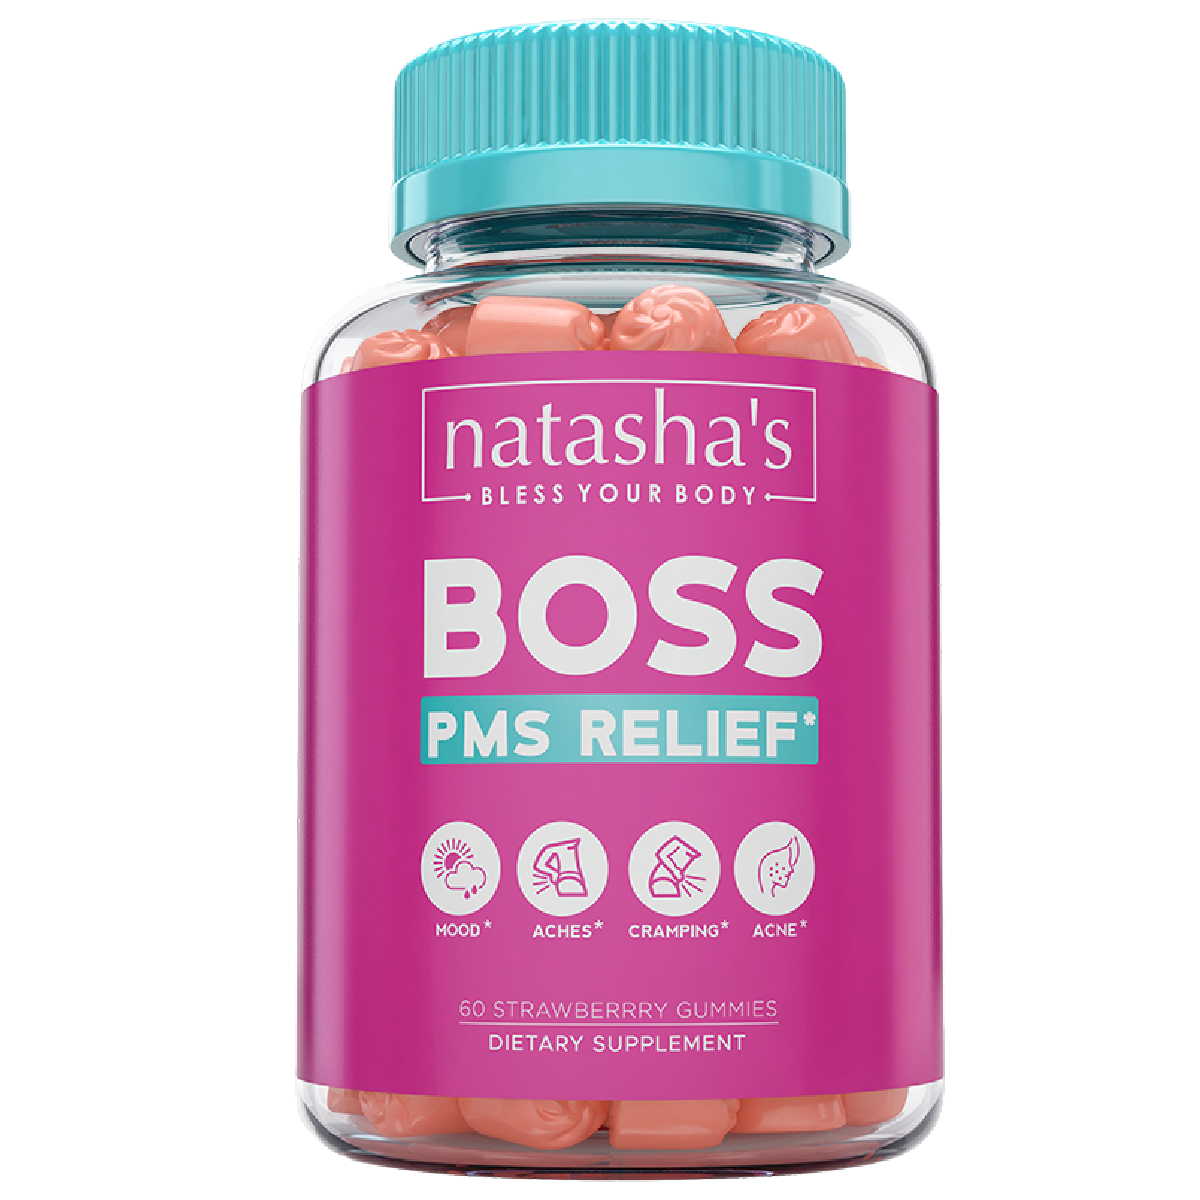 Boss PMS Relief Product